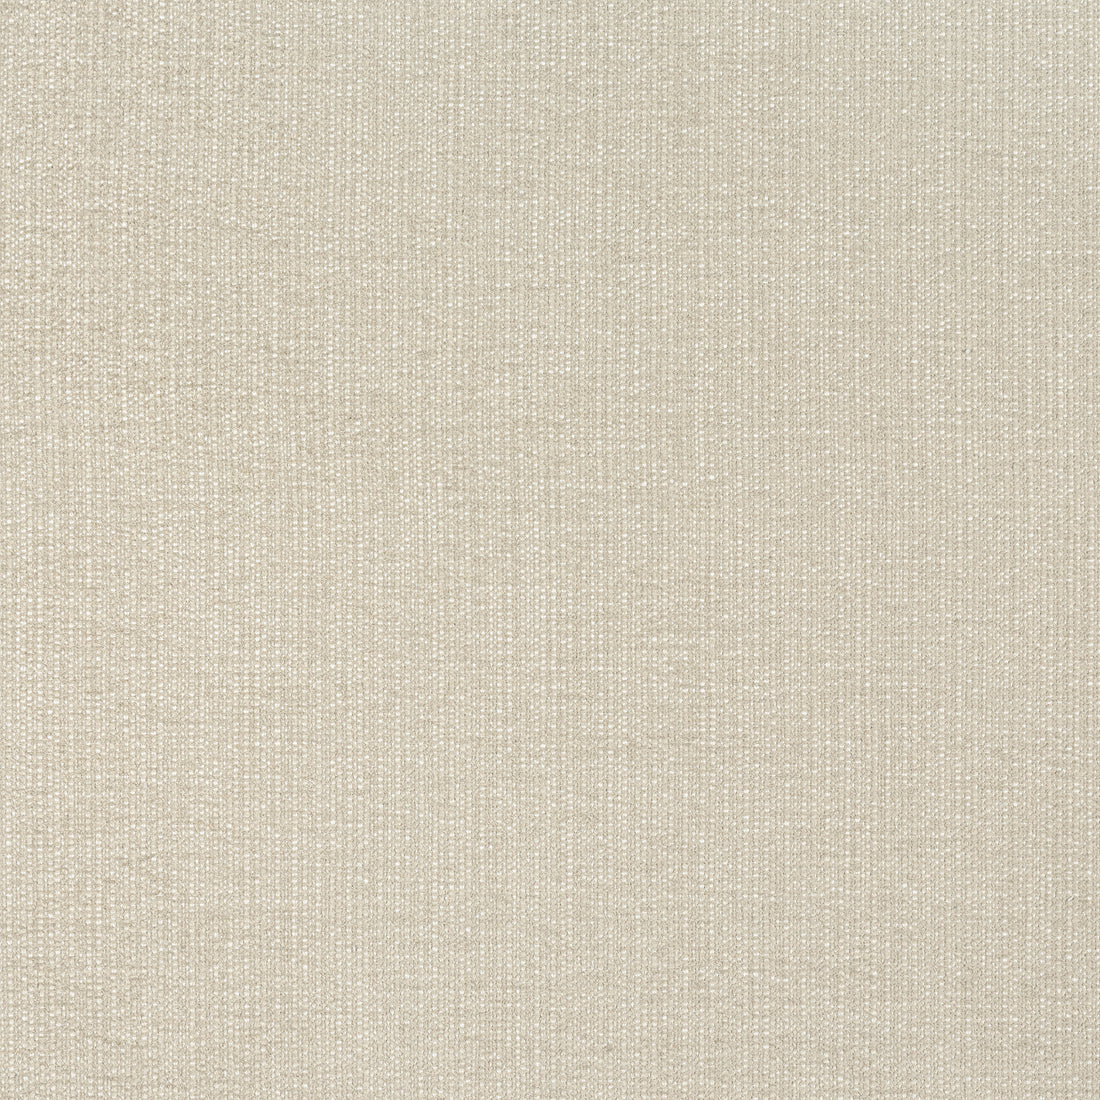 Veda fabric in stone color - pattern number W8710 - by Thibaut in the Haven Textures collection